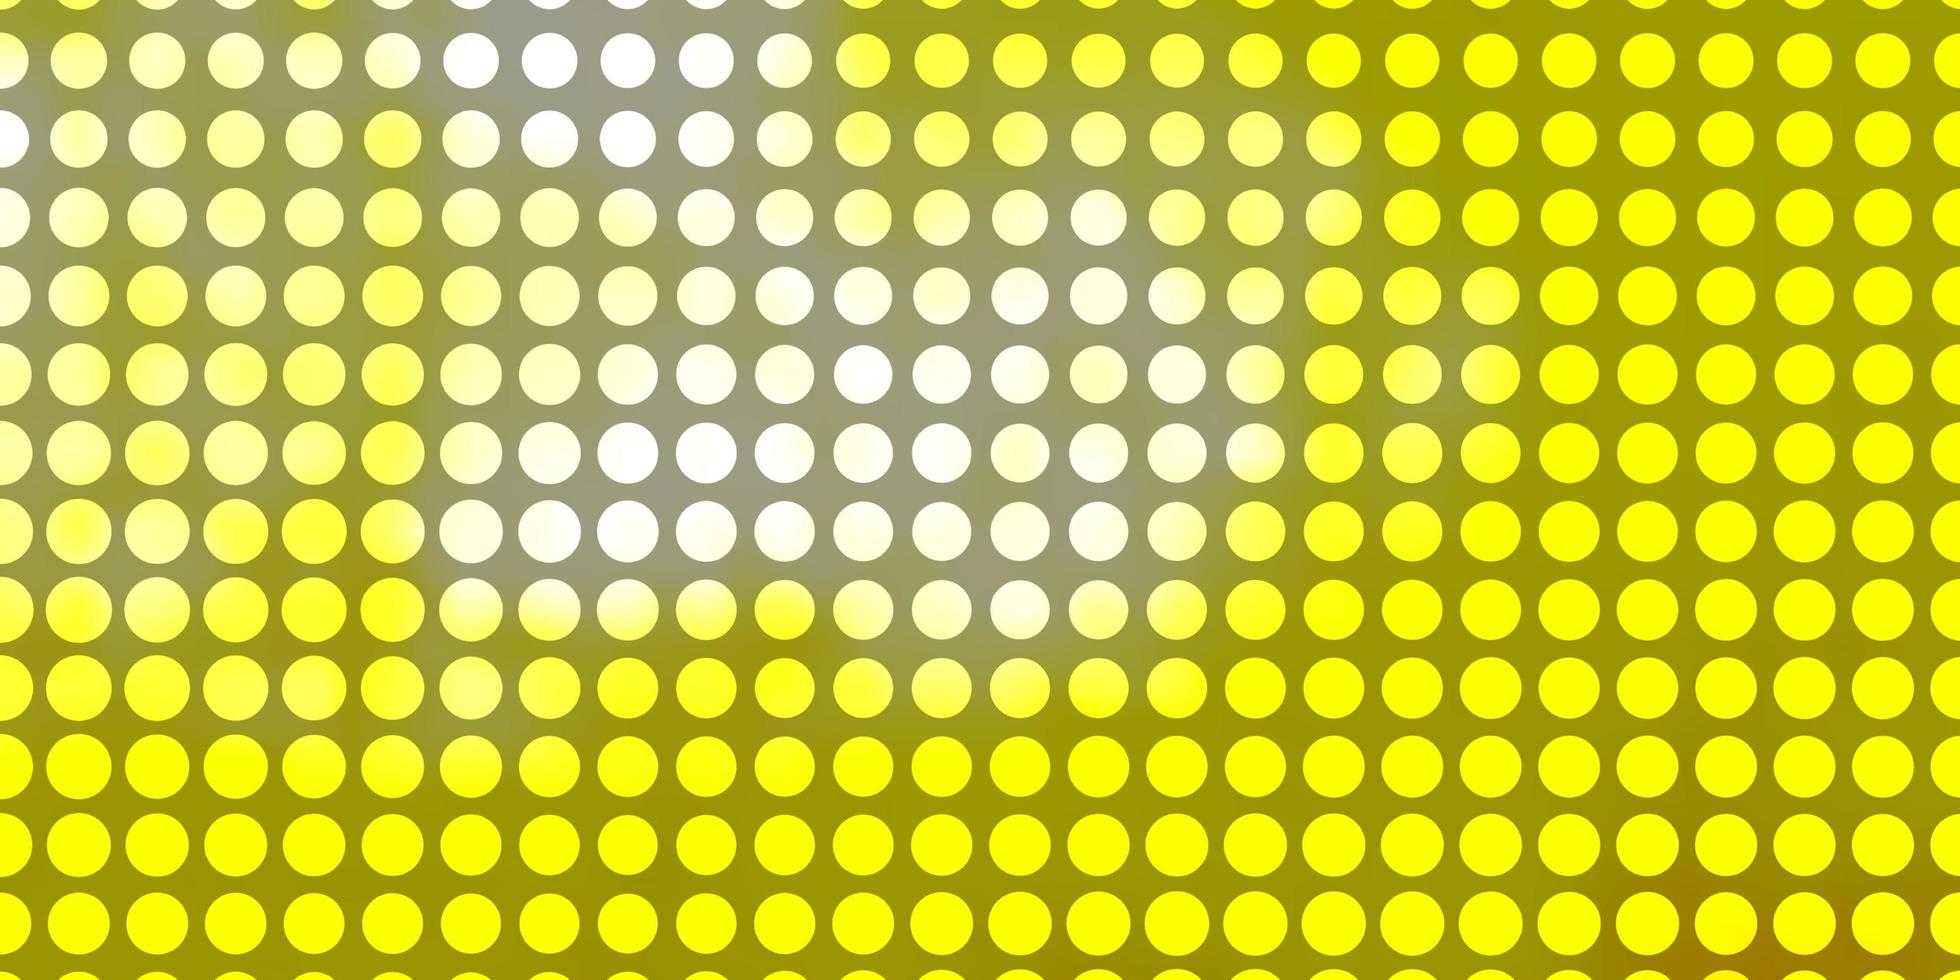 Light Yellow vector pattern with circles. Illustration with set of shining colorful abstract spheres. Design for your commercials.